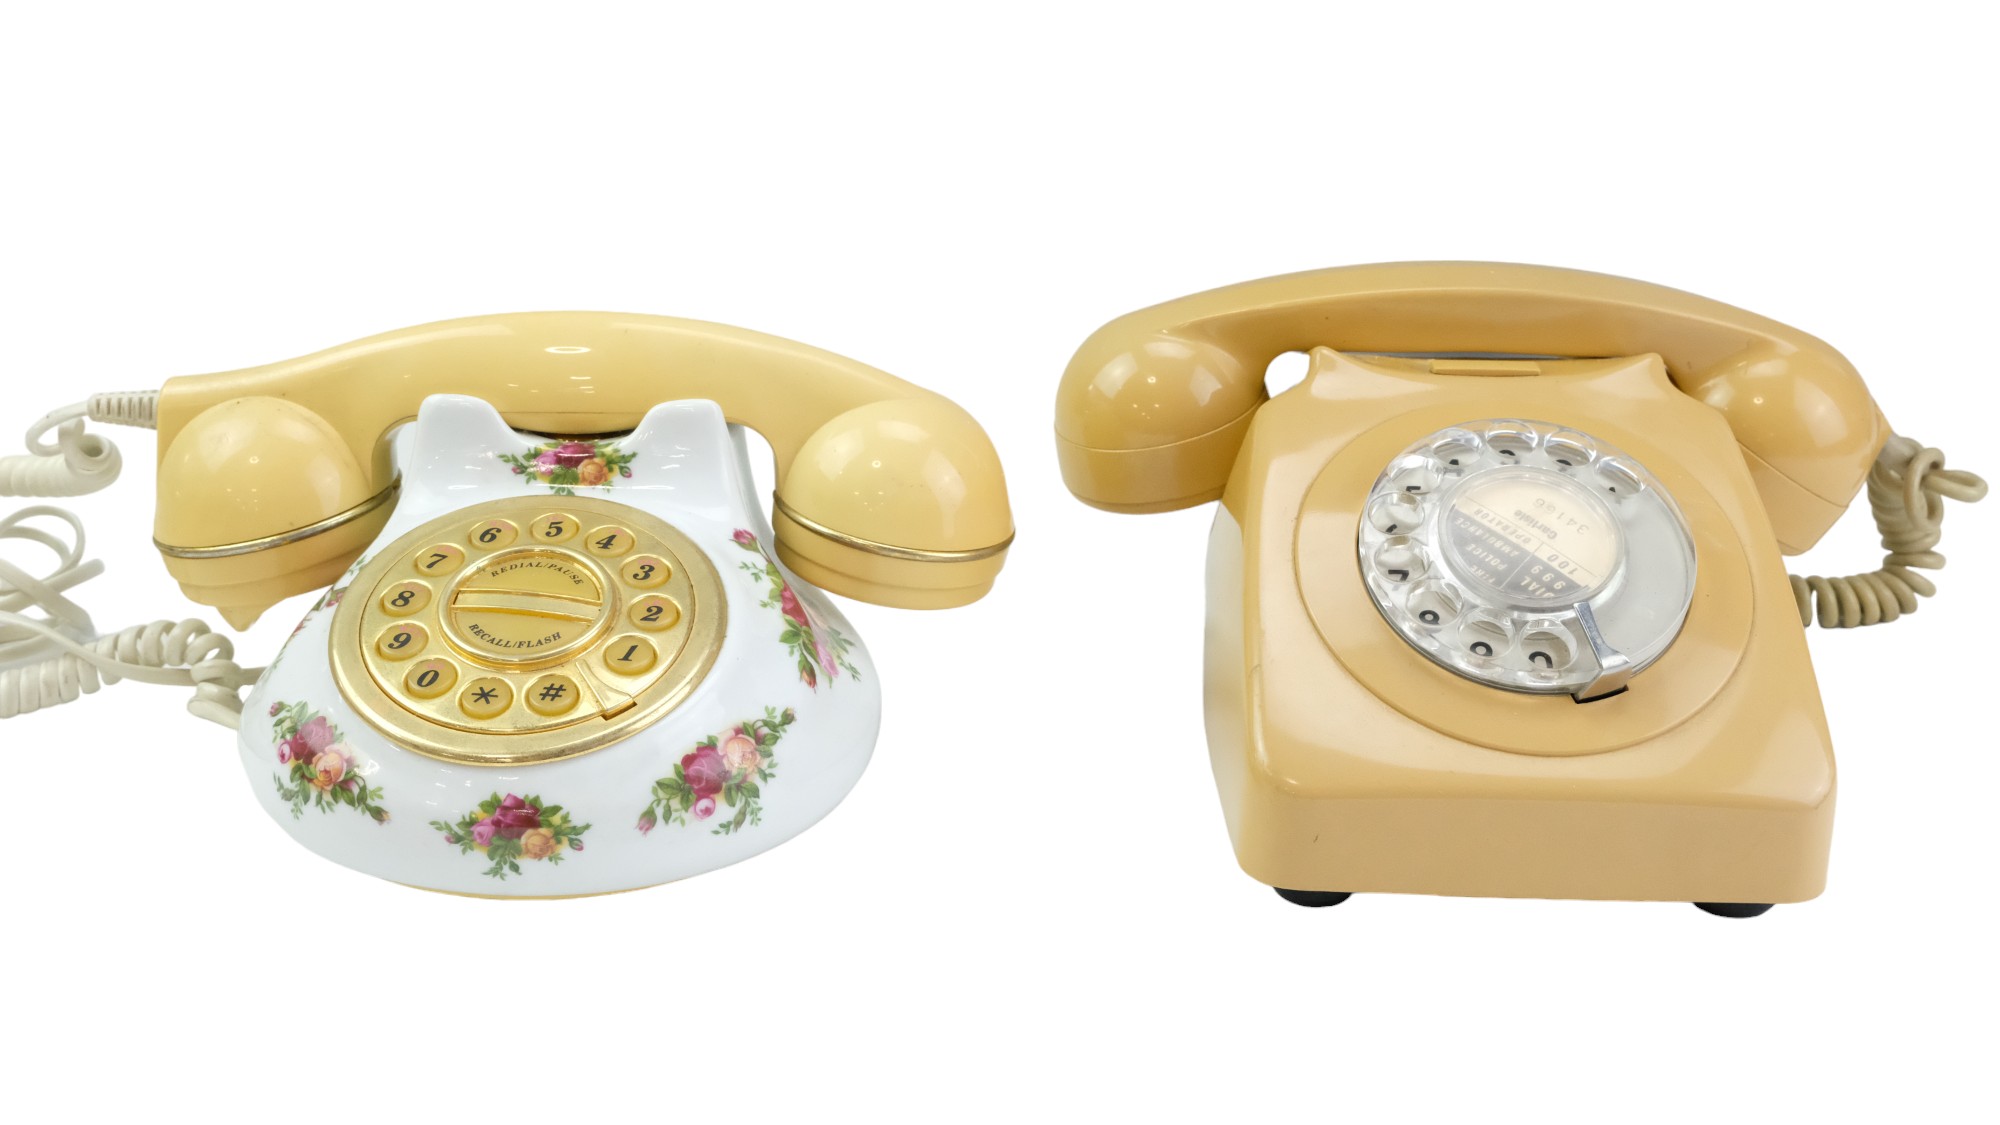 A 1970s GPO 746 Bakelite rotary dial telephone together with a 1962 Royal Albert Old Country Roses